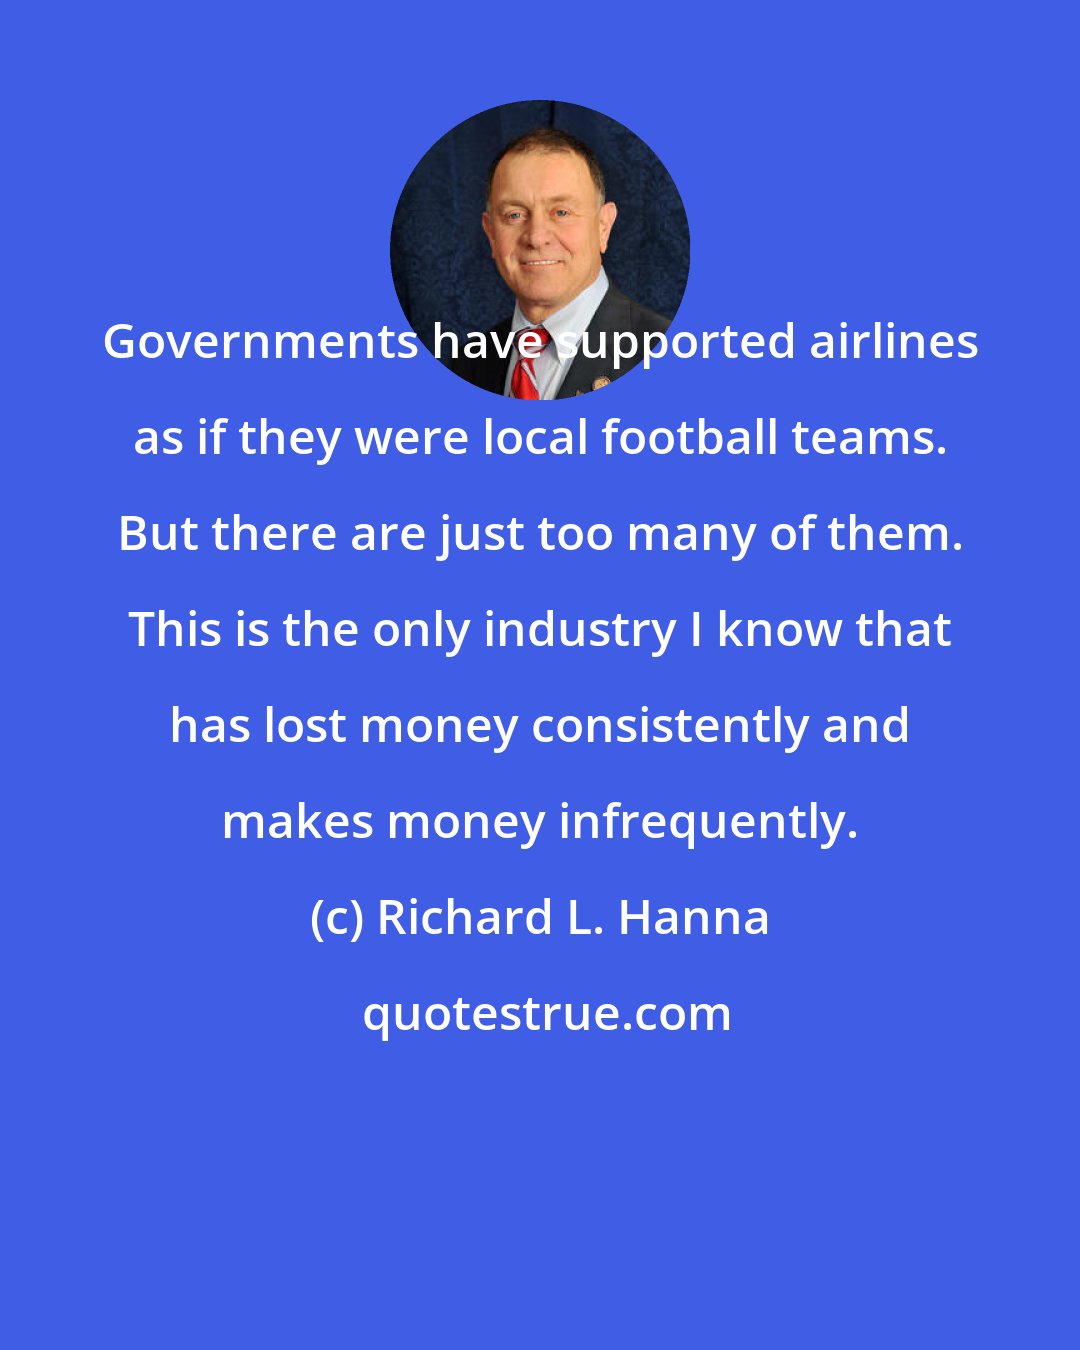 Richard L. Hanna: Governments have supported airlines as if they were local football teams. But there are just too many of them. This is the only industry I know that has lost money consistently and makes money infrequently.